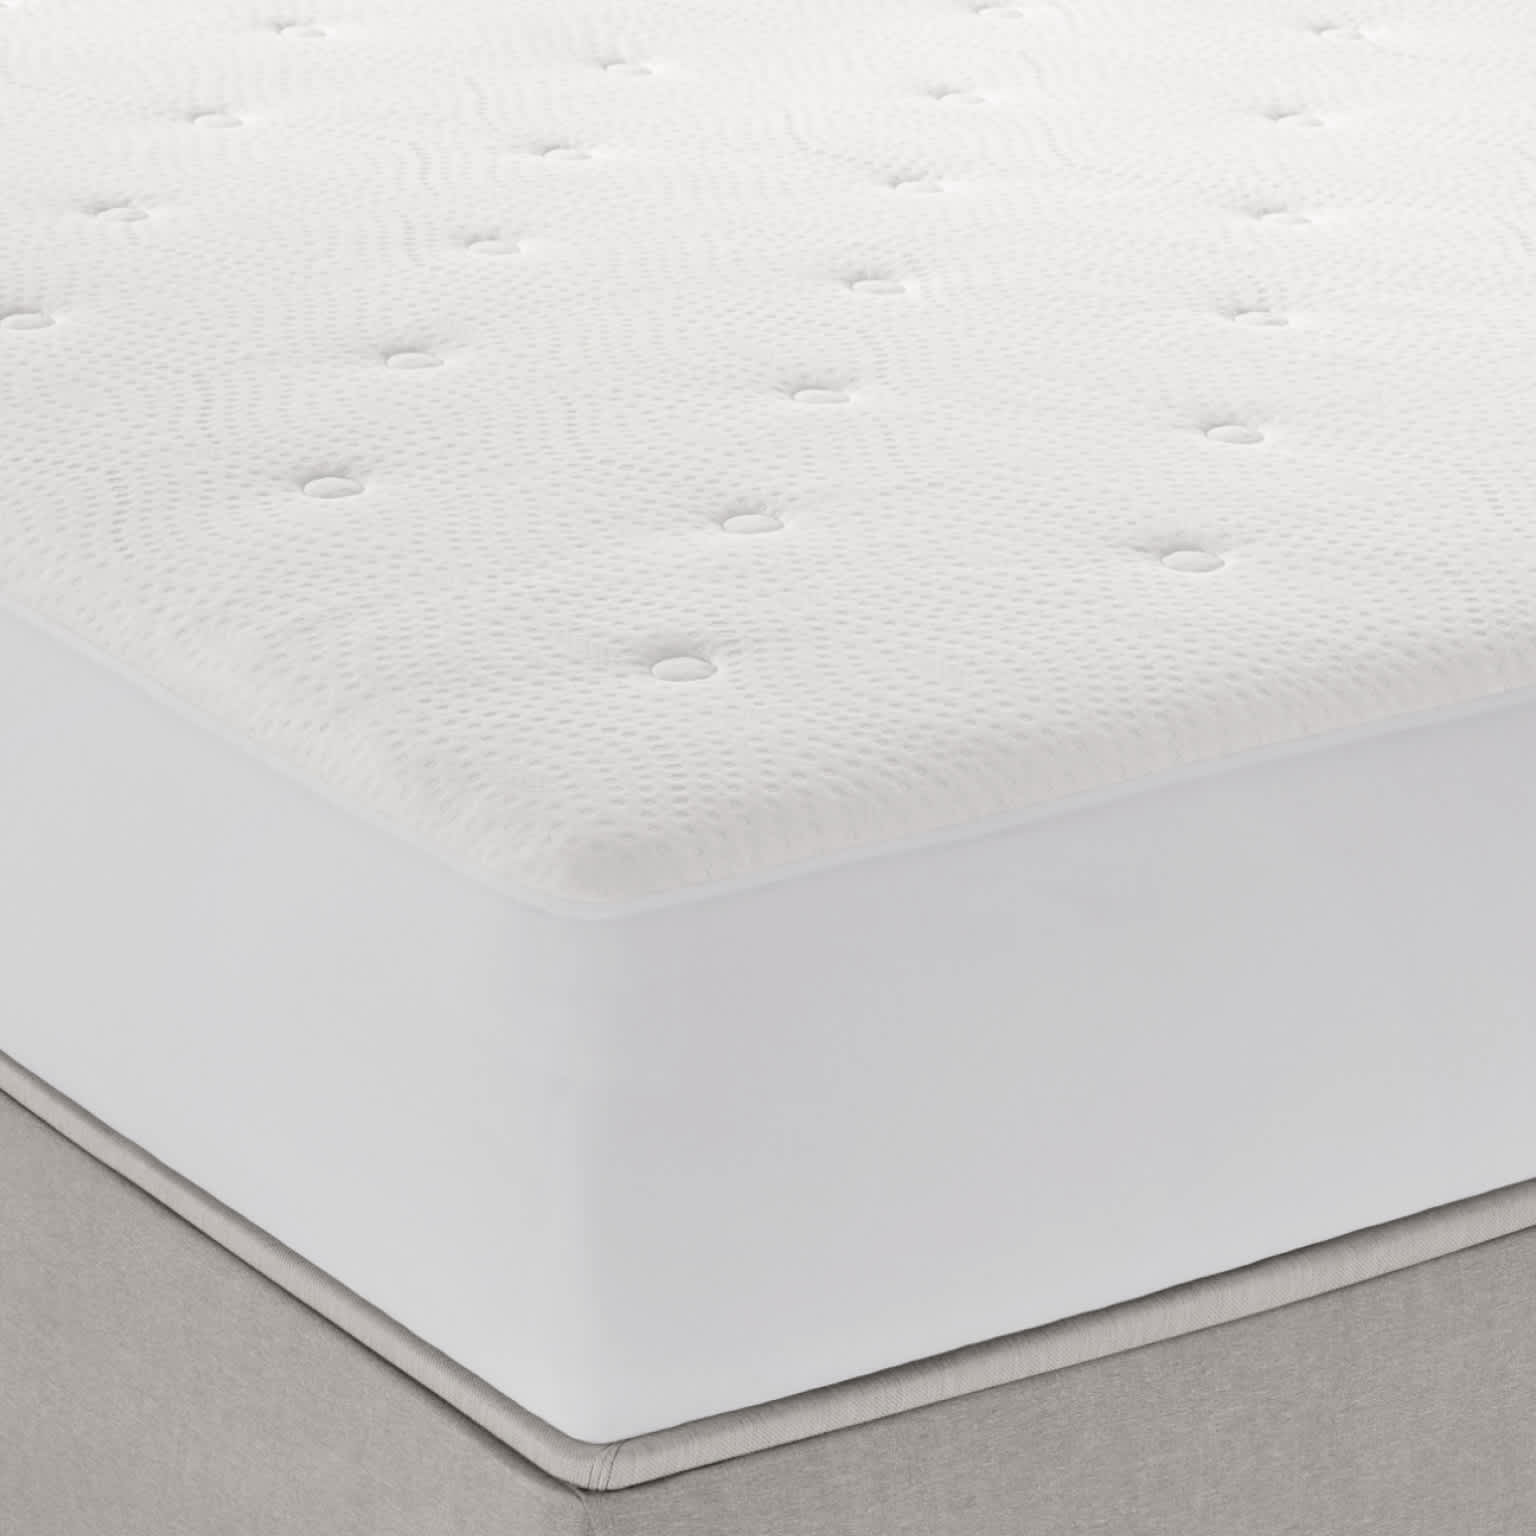 Mattress Protector Pad Topper, Protective Cover Mattresses